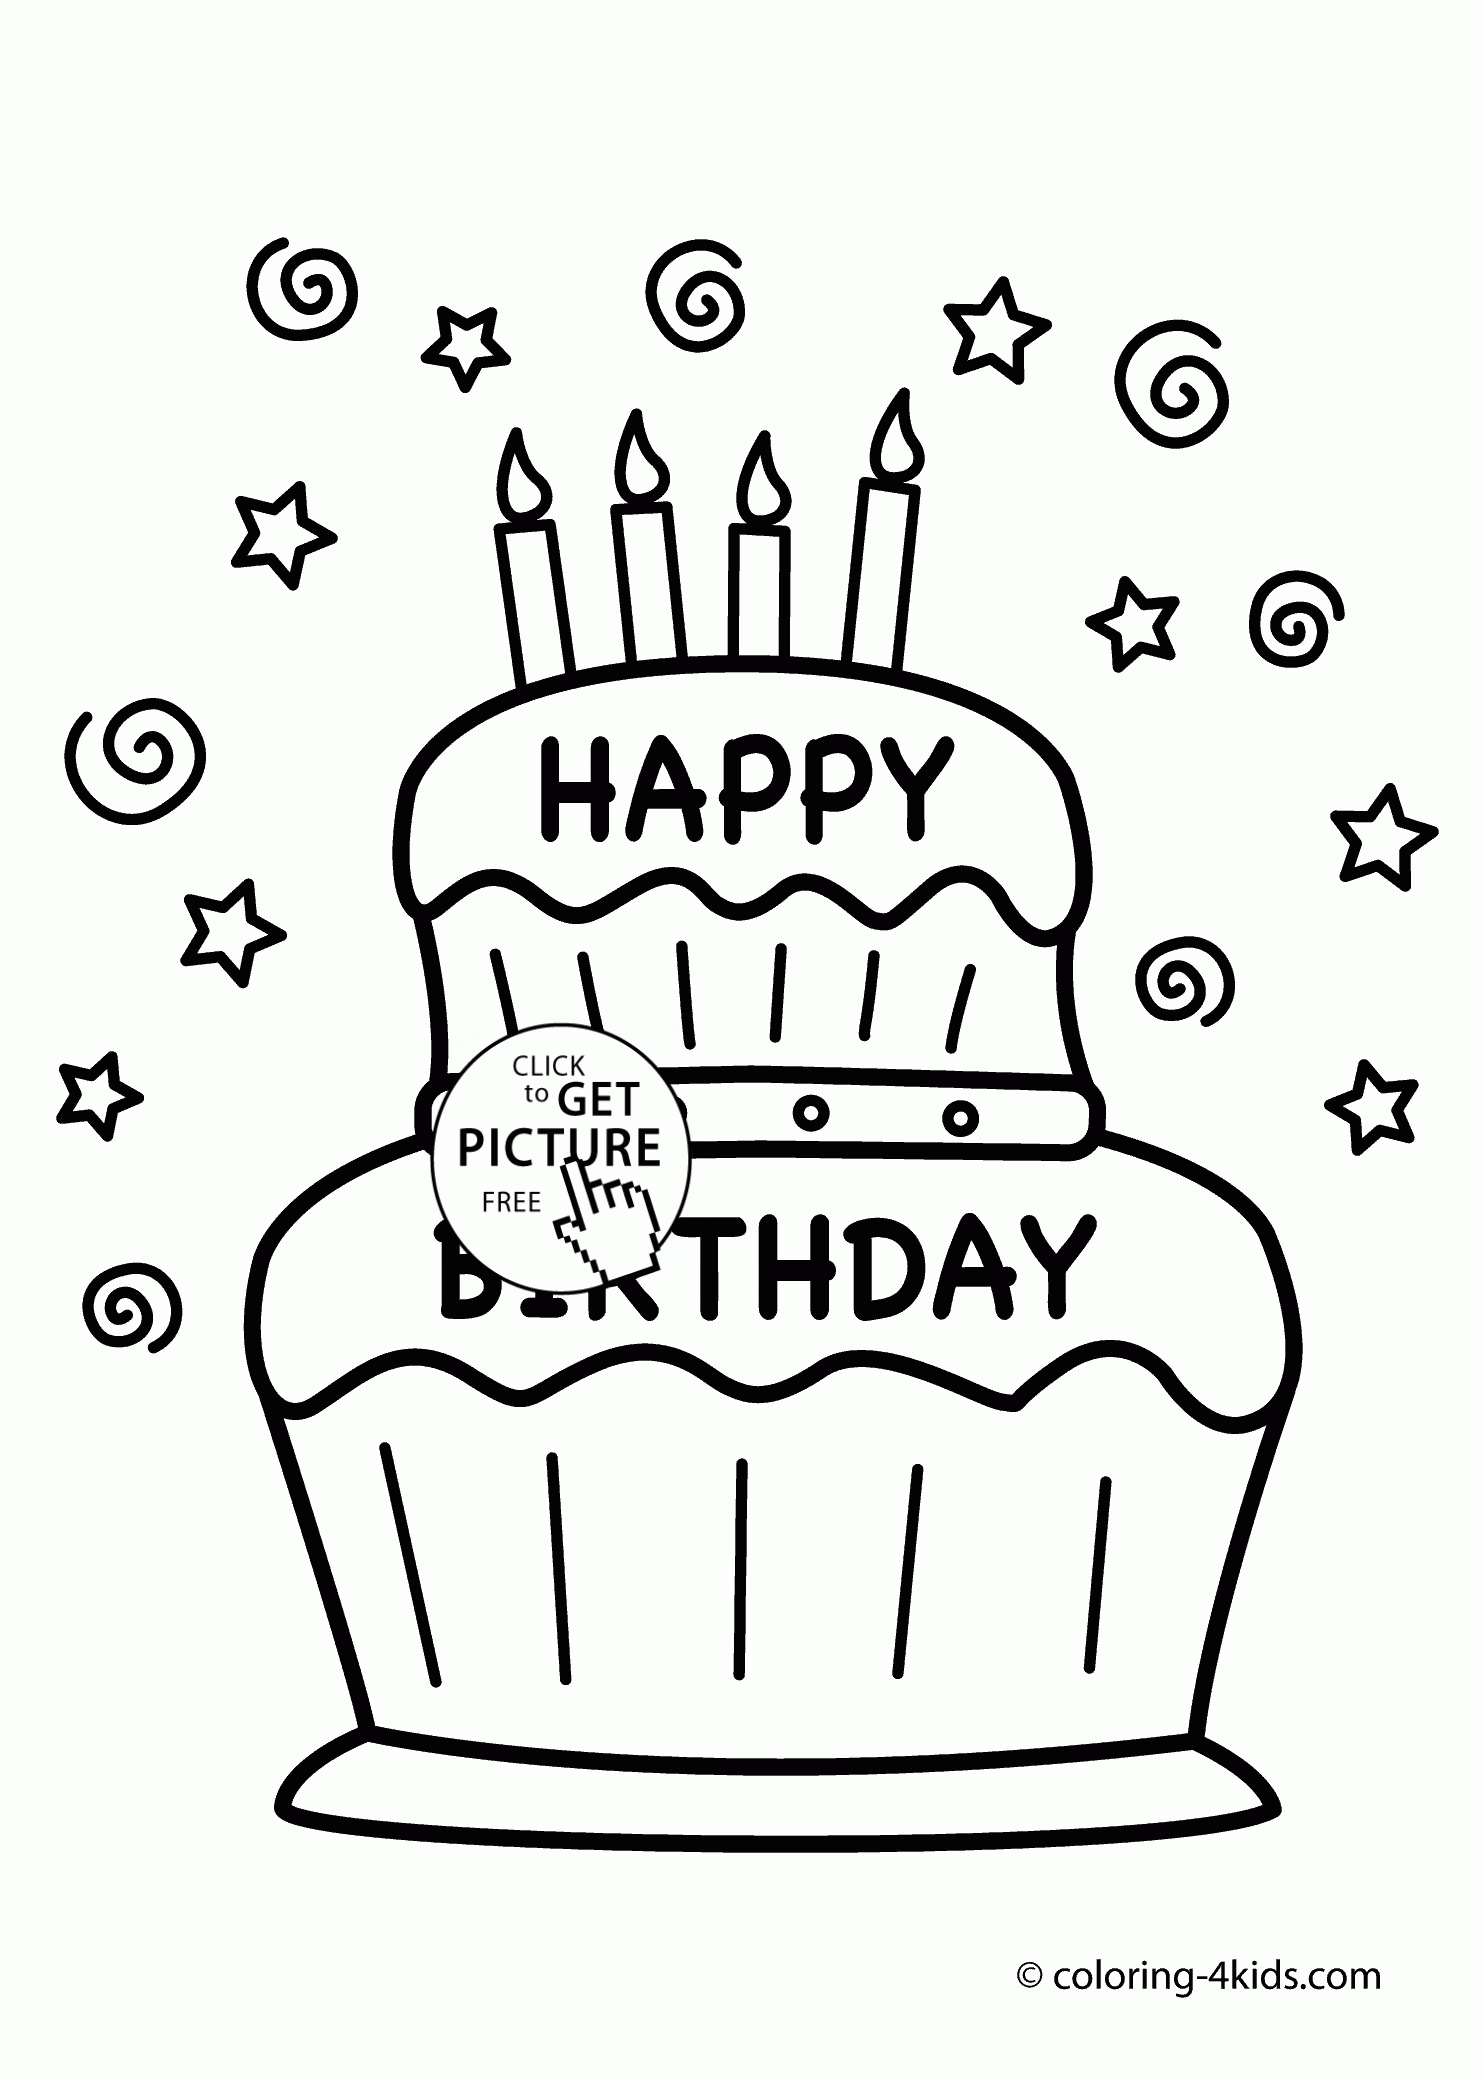 Happy Birthday Cake Card Coloring Page For Kids, Holiday Coloring - Free Printable Birthday Cake